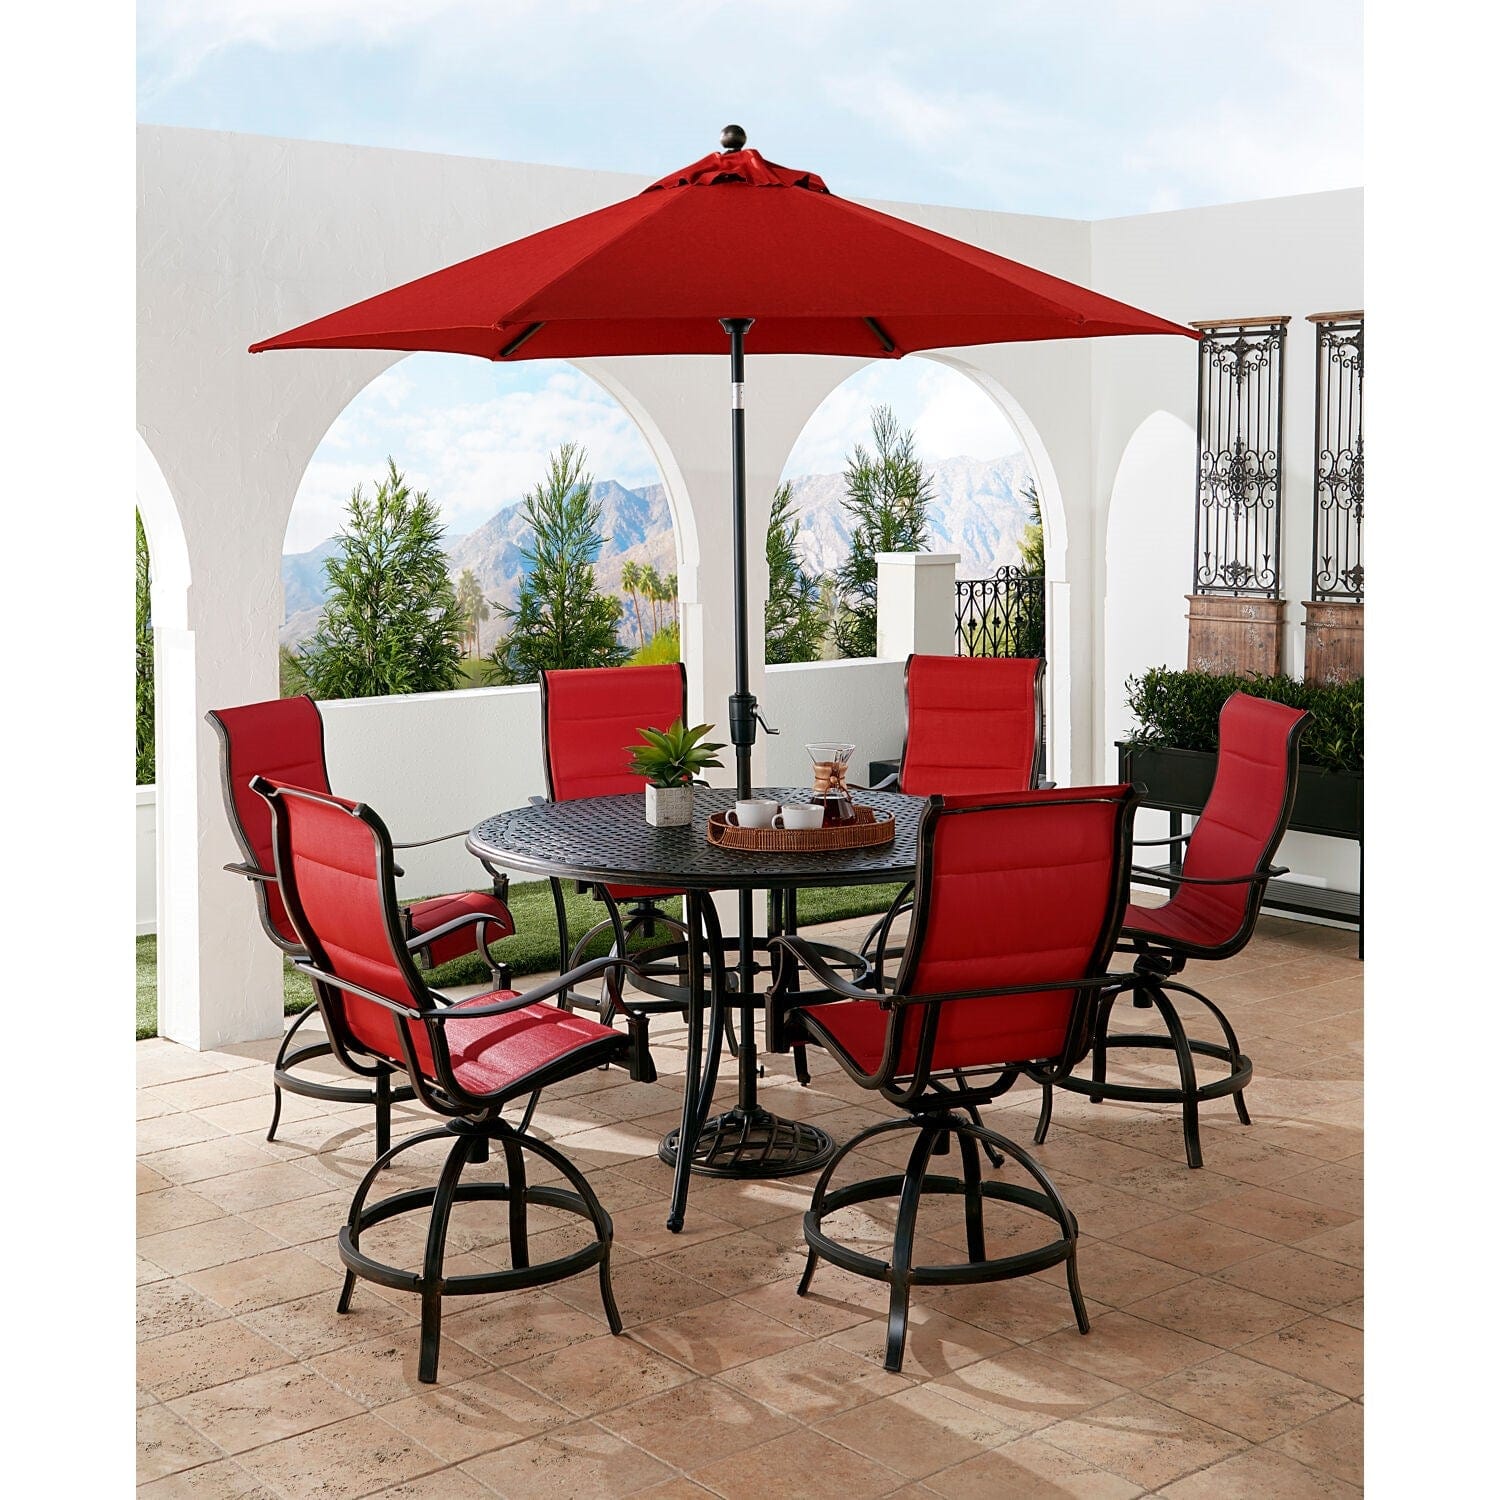 Hanover Outdoor Dining Set Hanover - Traditions 7-Piece Aluminum Frame High-Dining Set in Red with 6 Swivel Counter-Height Chairs, 56-in. Table, and 9-ft.. Umbrella | TRADDN7PCPDBR-SU-R